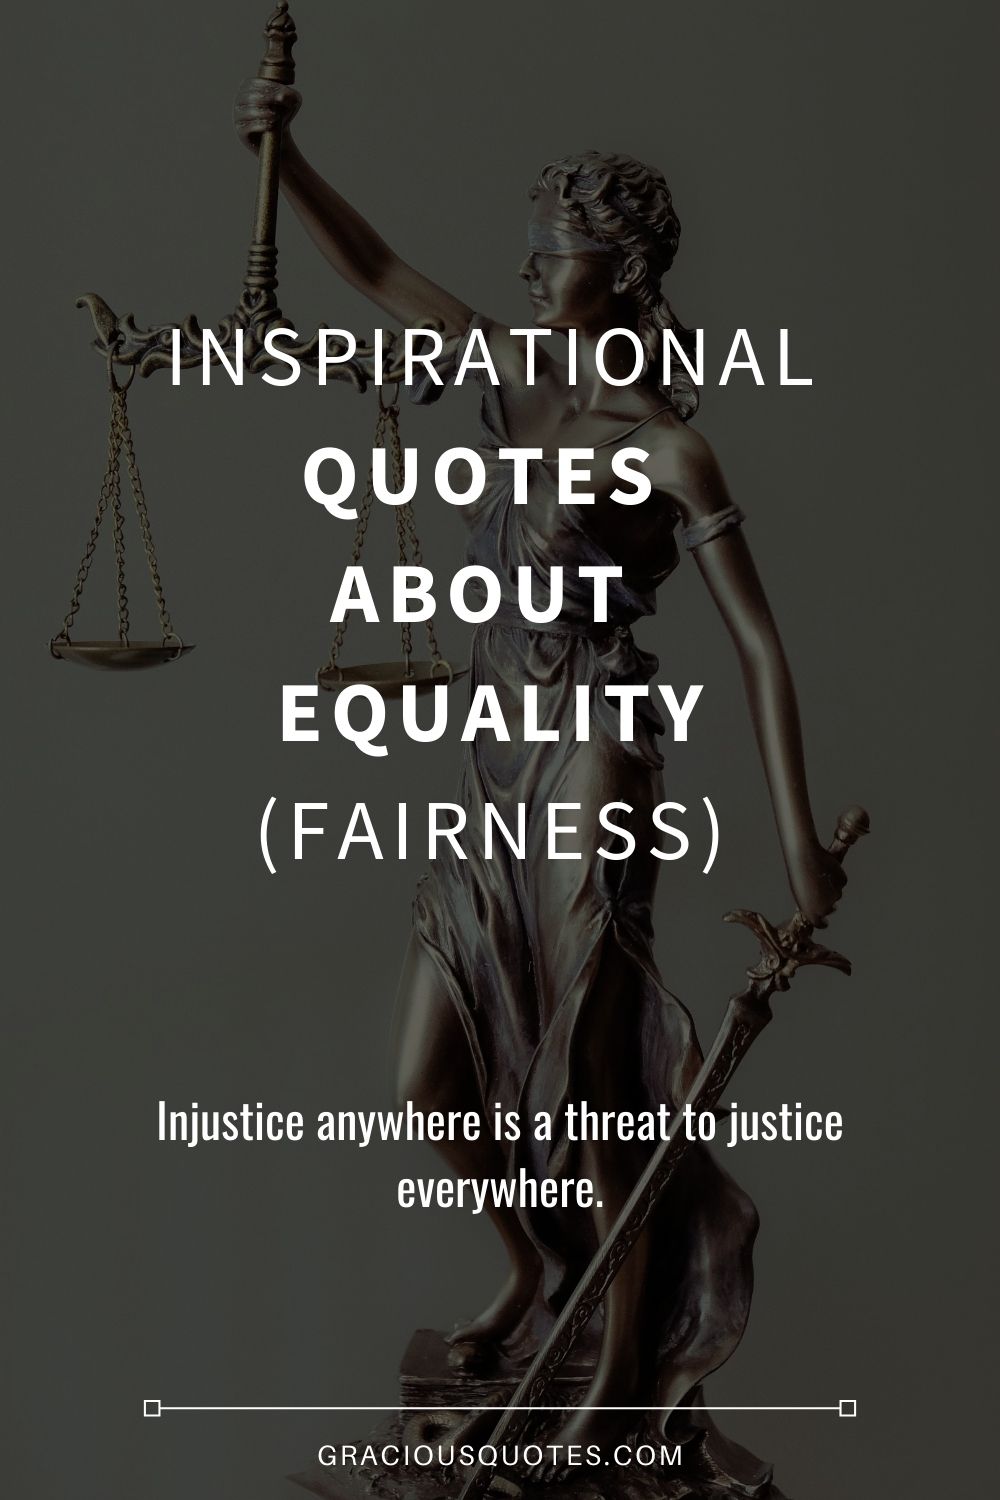 Inspirational Quotes about Equality (FAIRNESS) - Gracious Quotes